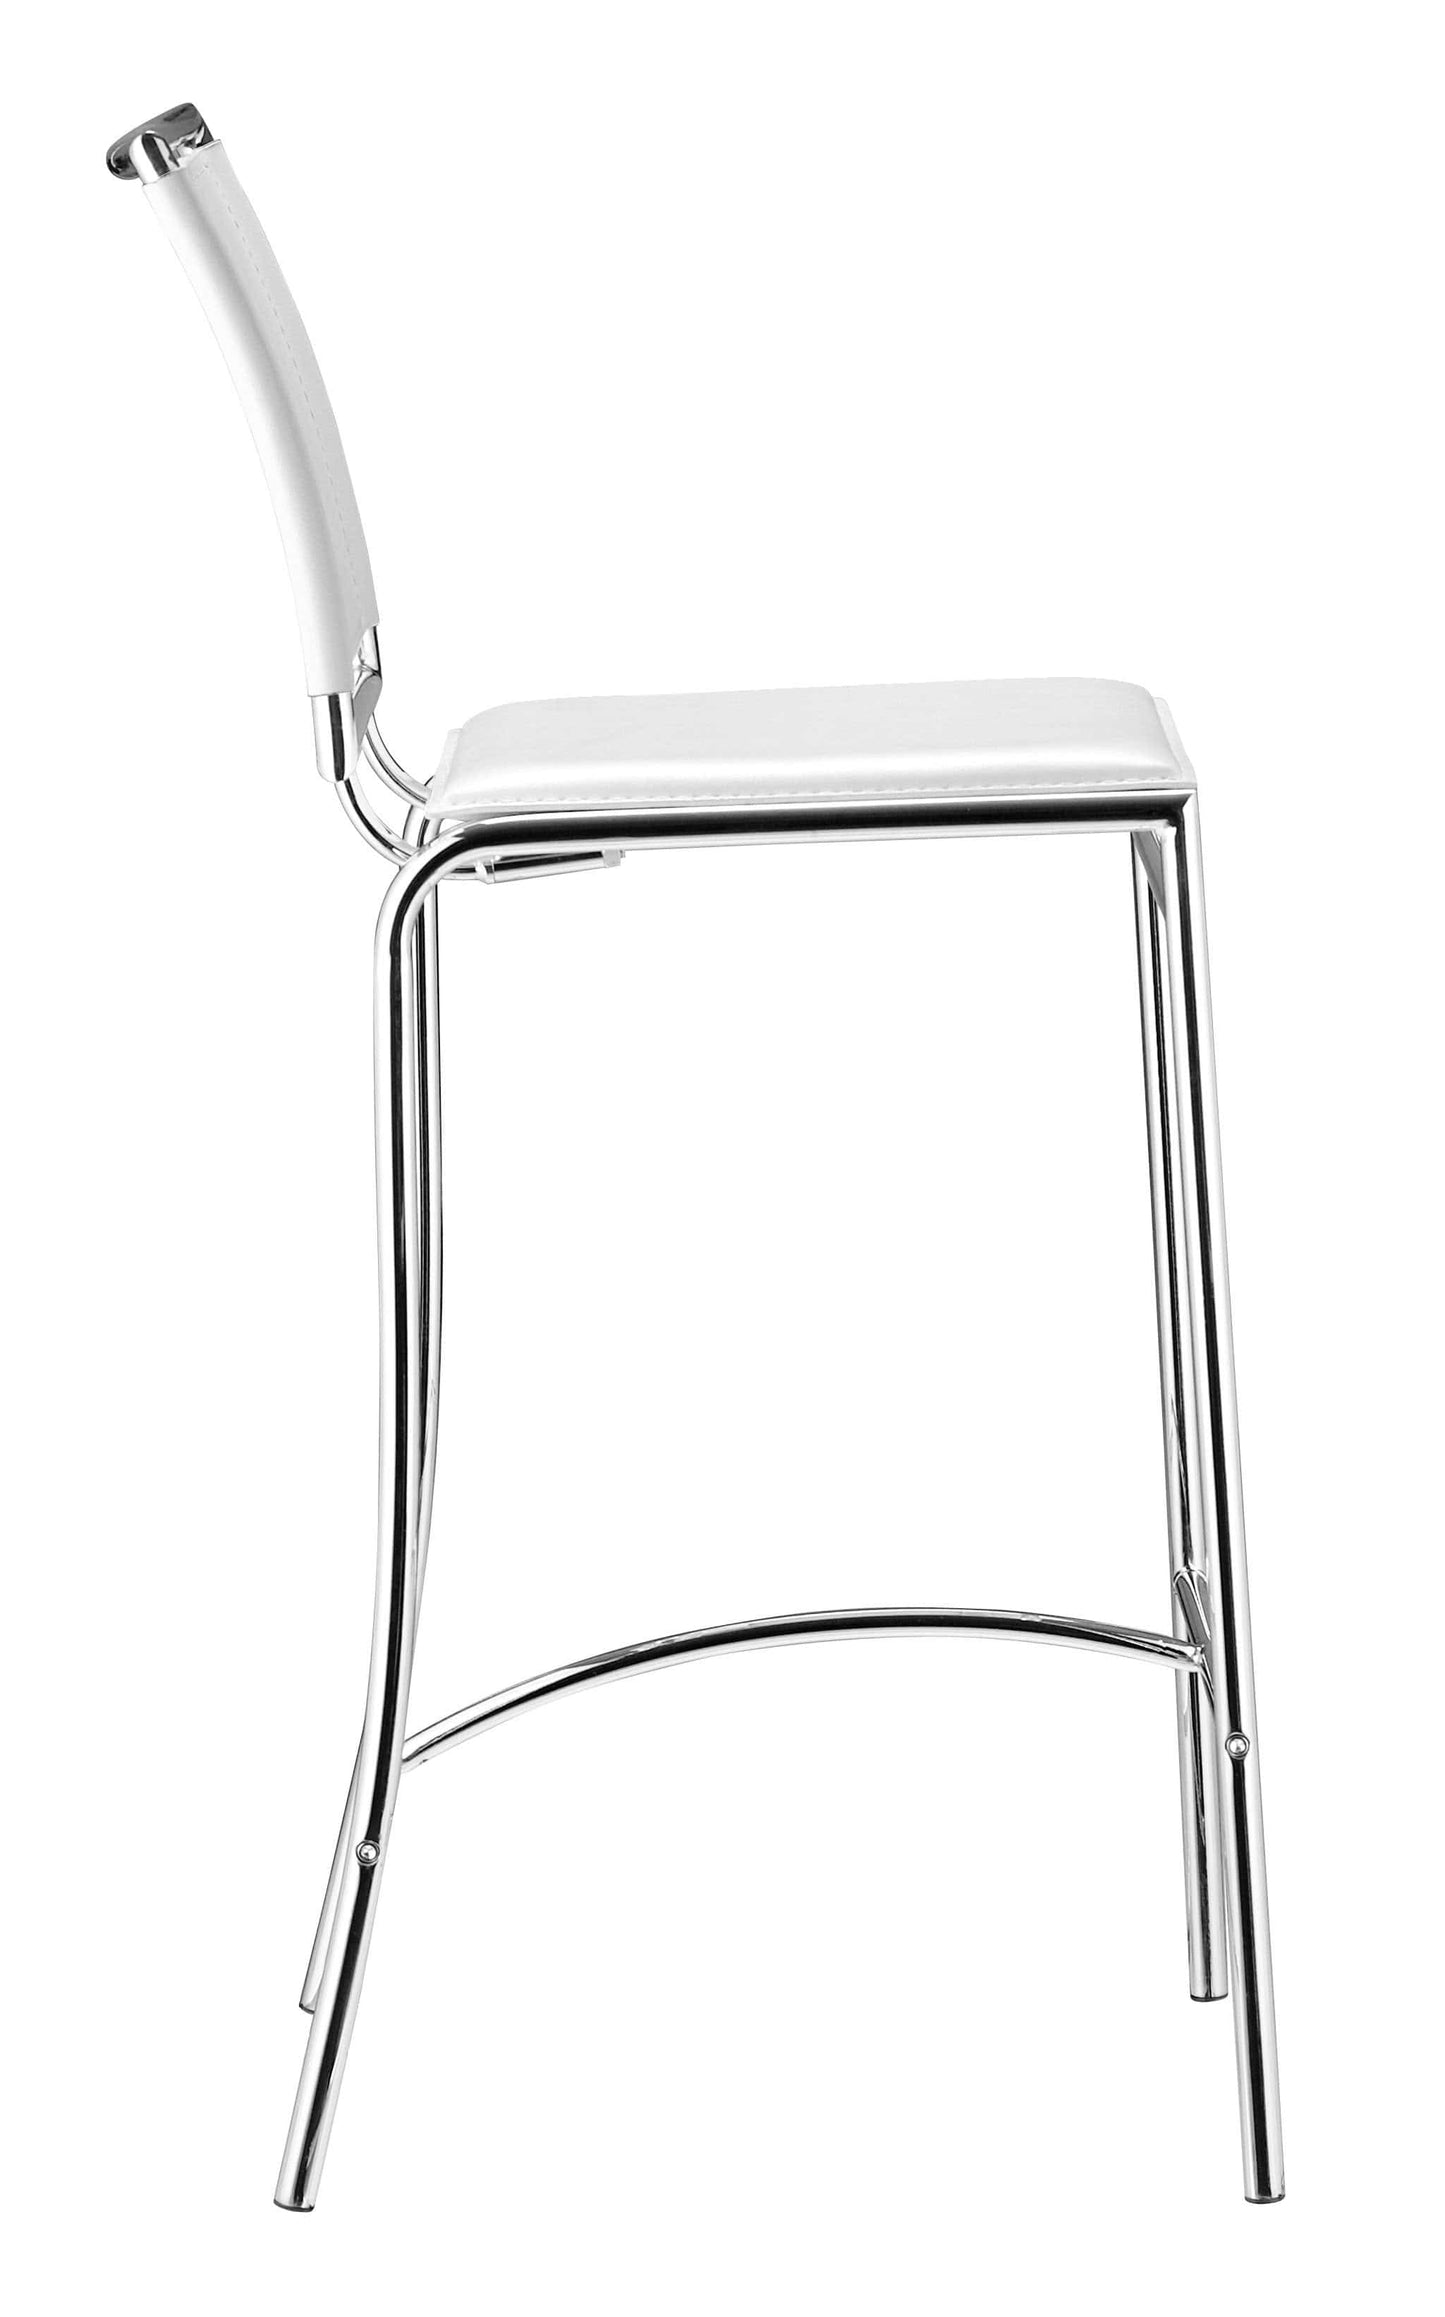 Side view of stool with chrome legs